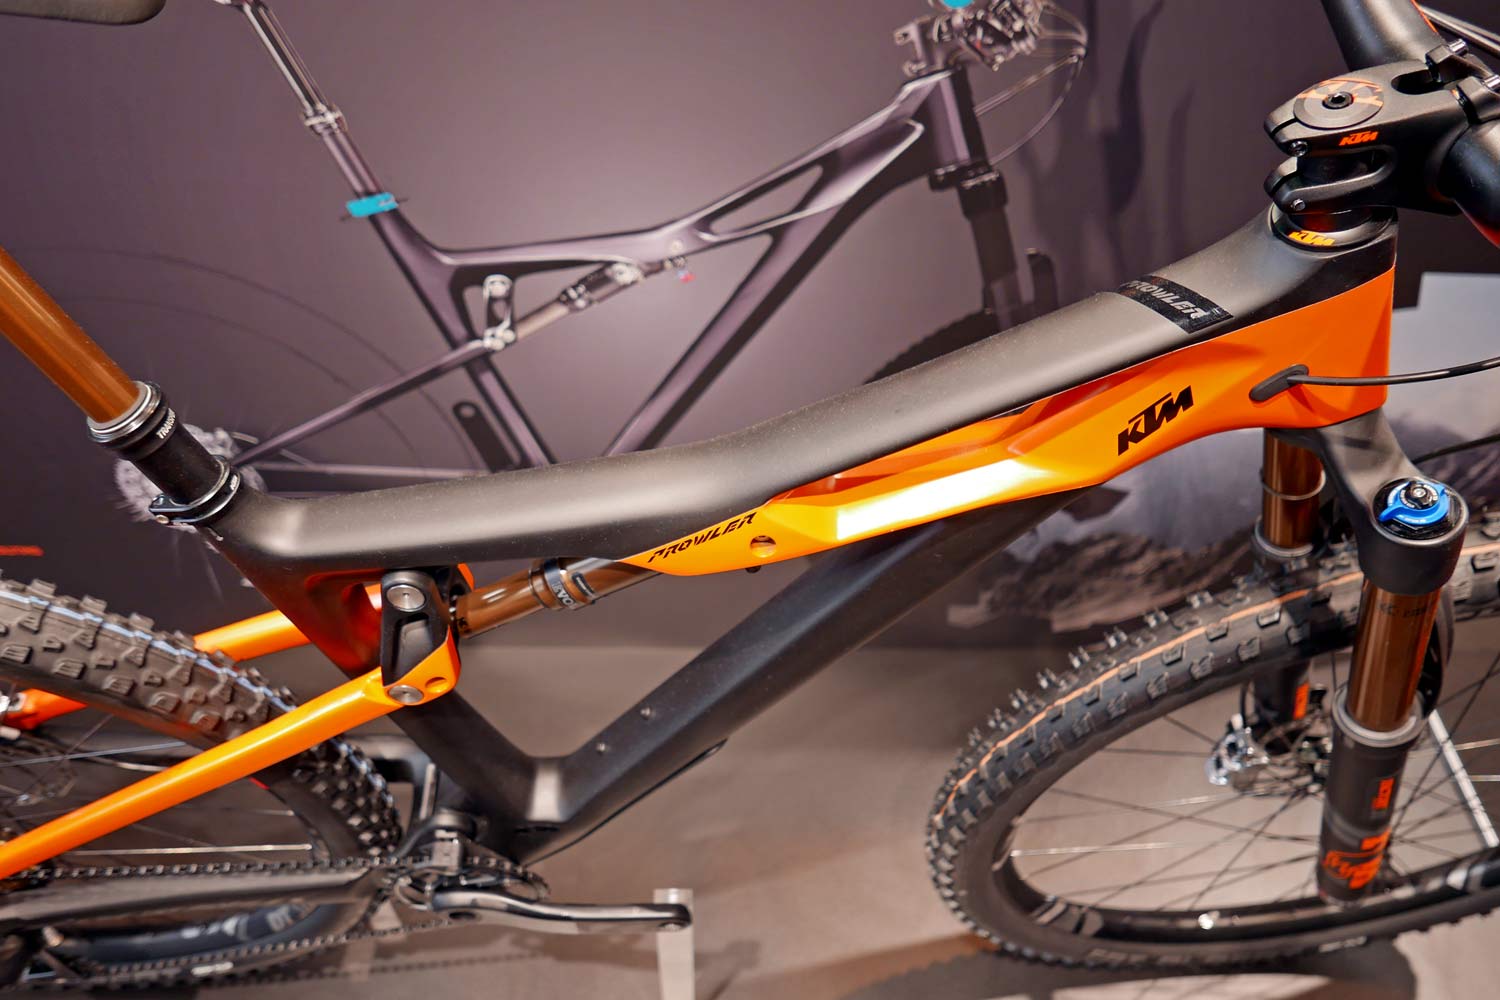 EB17: KTM offers a closer look at the Prowler all mountain bike & more